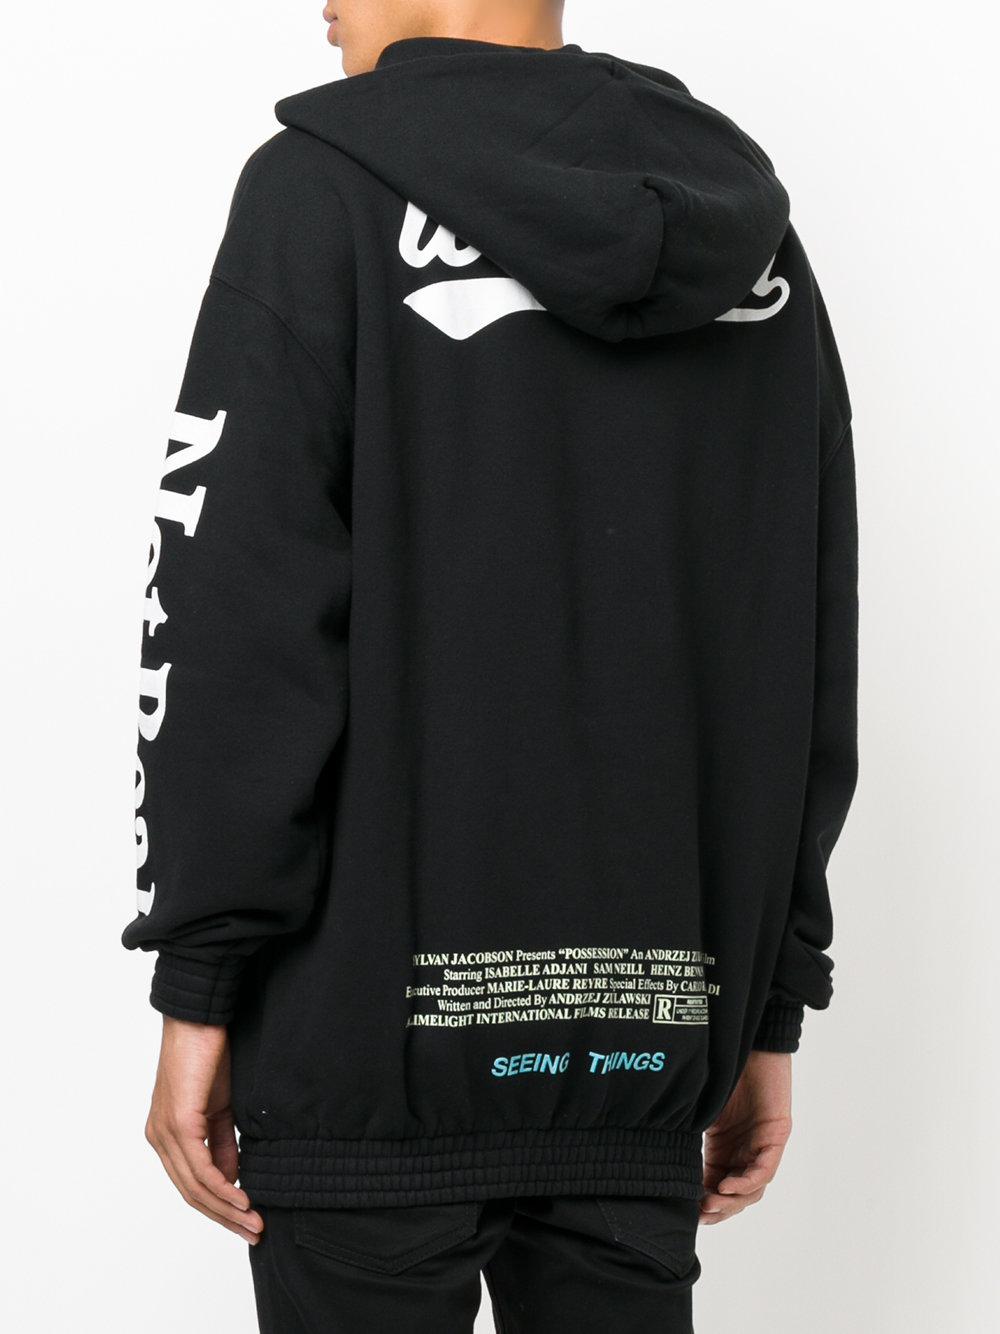 off white seeing things crewneck